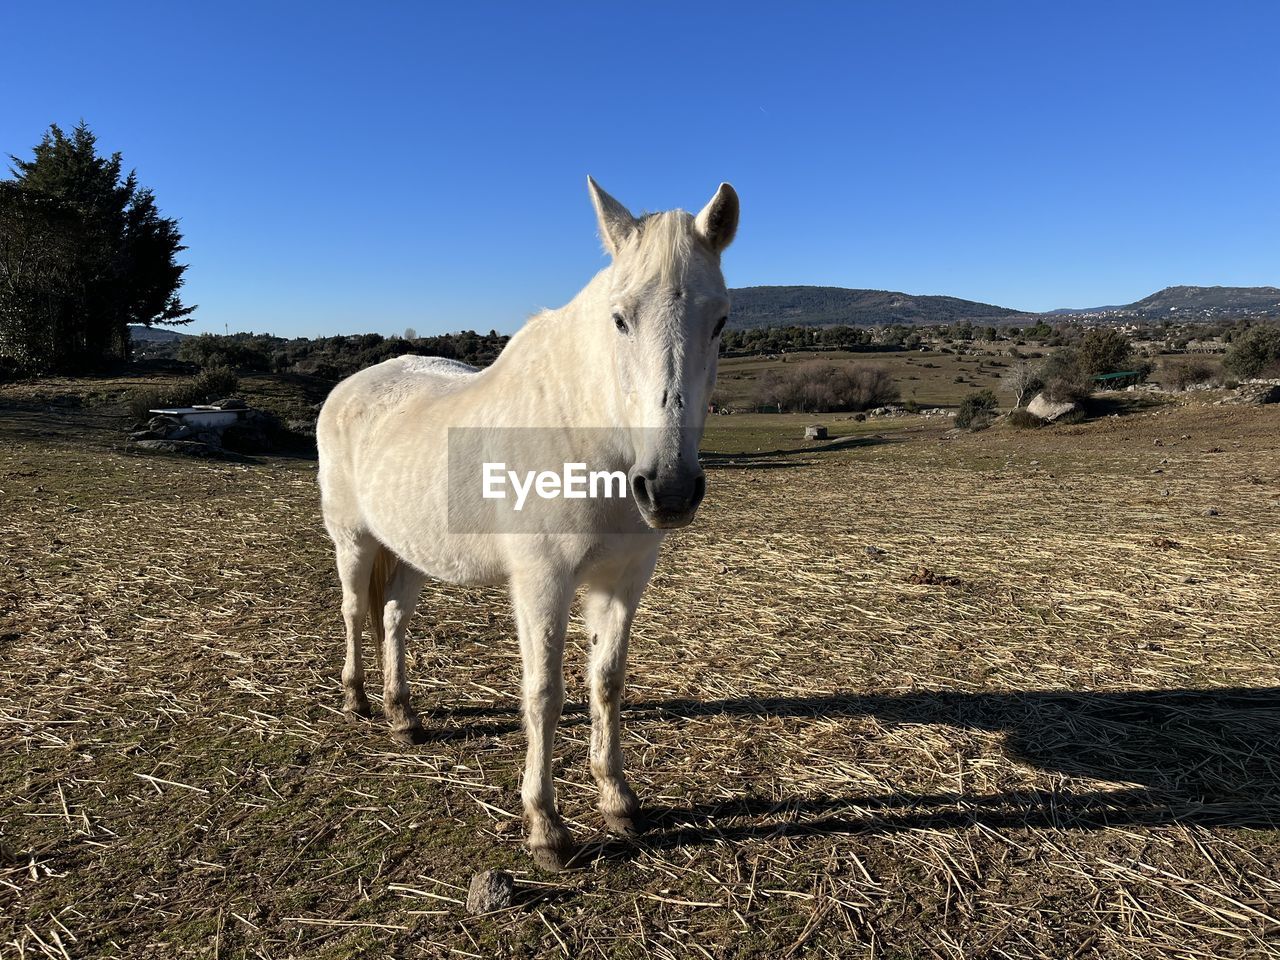 mammal, animal, animal themes, domestic animals, livestock, horse, pet, one animal, animal wildlife, nature, sky, landscape, clear sky, standing, pasture, no people, land, working animal, environment, agriculture, blue, plant, donkey, sunlight, sunny, rural scene, day, mustang horse, full length, shadow, outdoors, field, white, pack animal, grazing, rural area, mare, portrait, herbivorous, grass, tree, farm